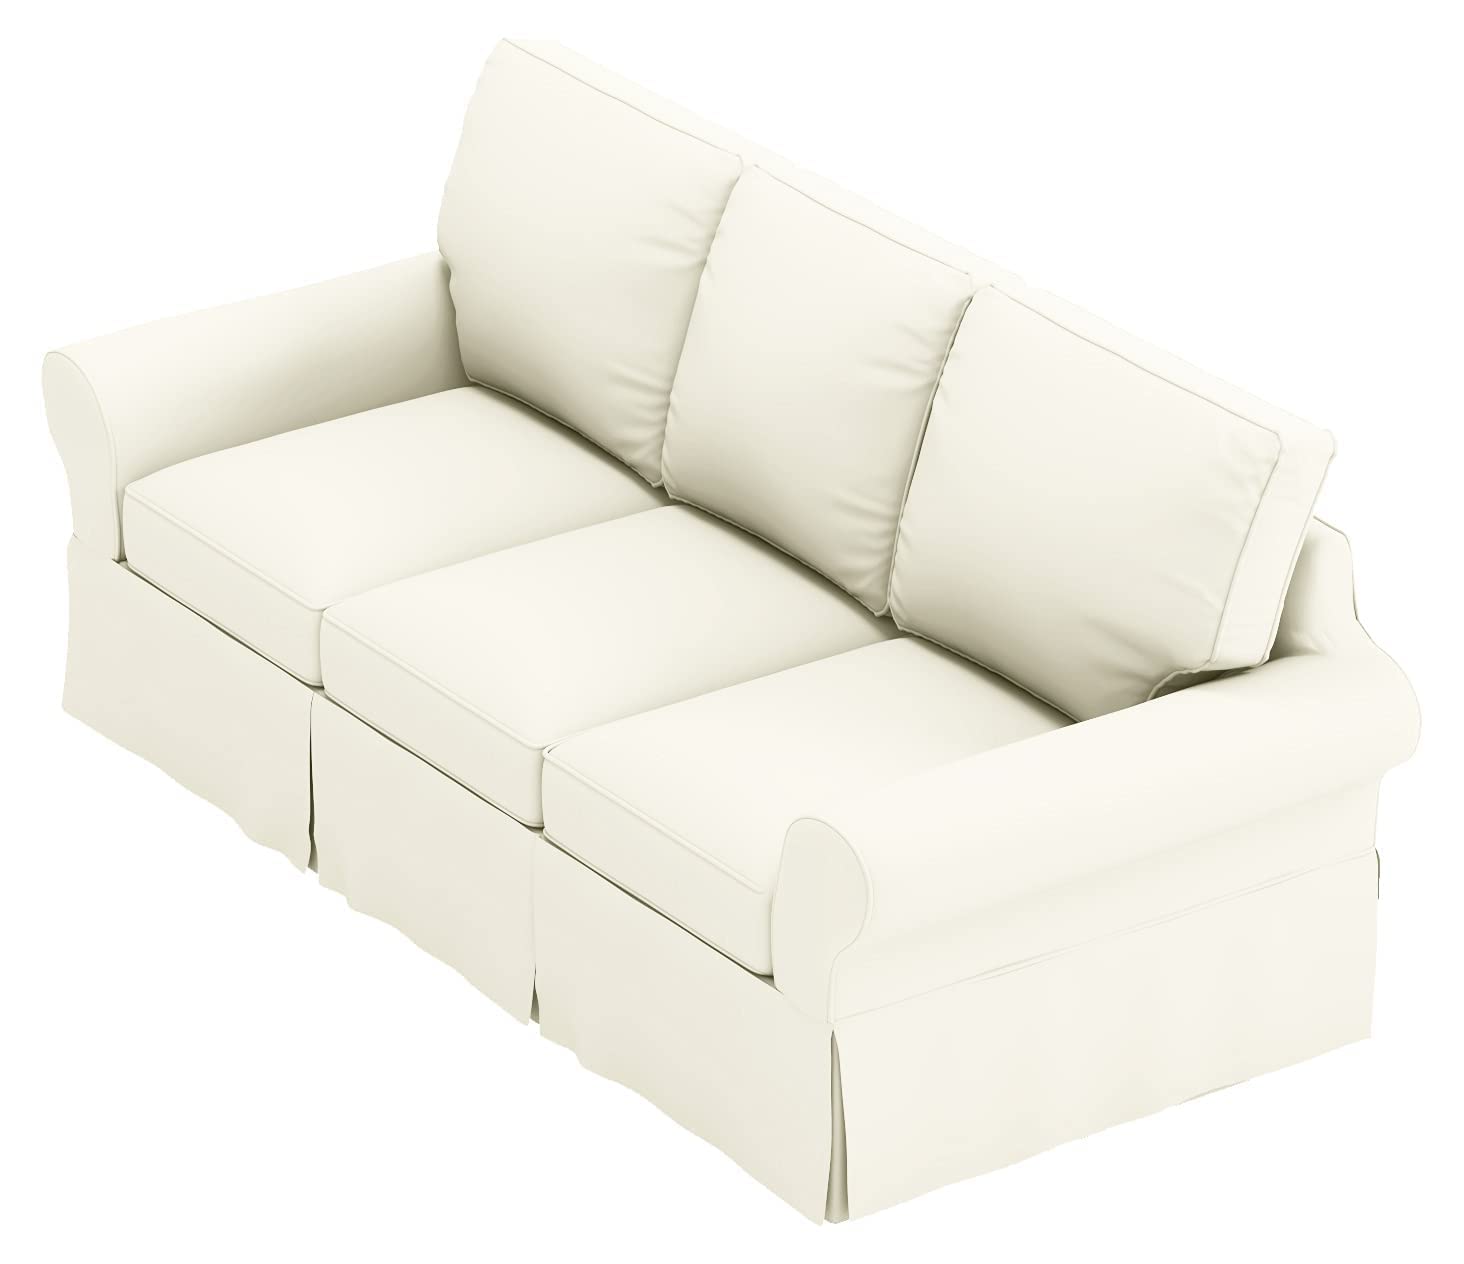 The Sofa Cover is 3 Seat Sofa Slipcover Replacement. It Fits Pottery Barn PB Basic Three Seat Sofa (Cotton Yellow)